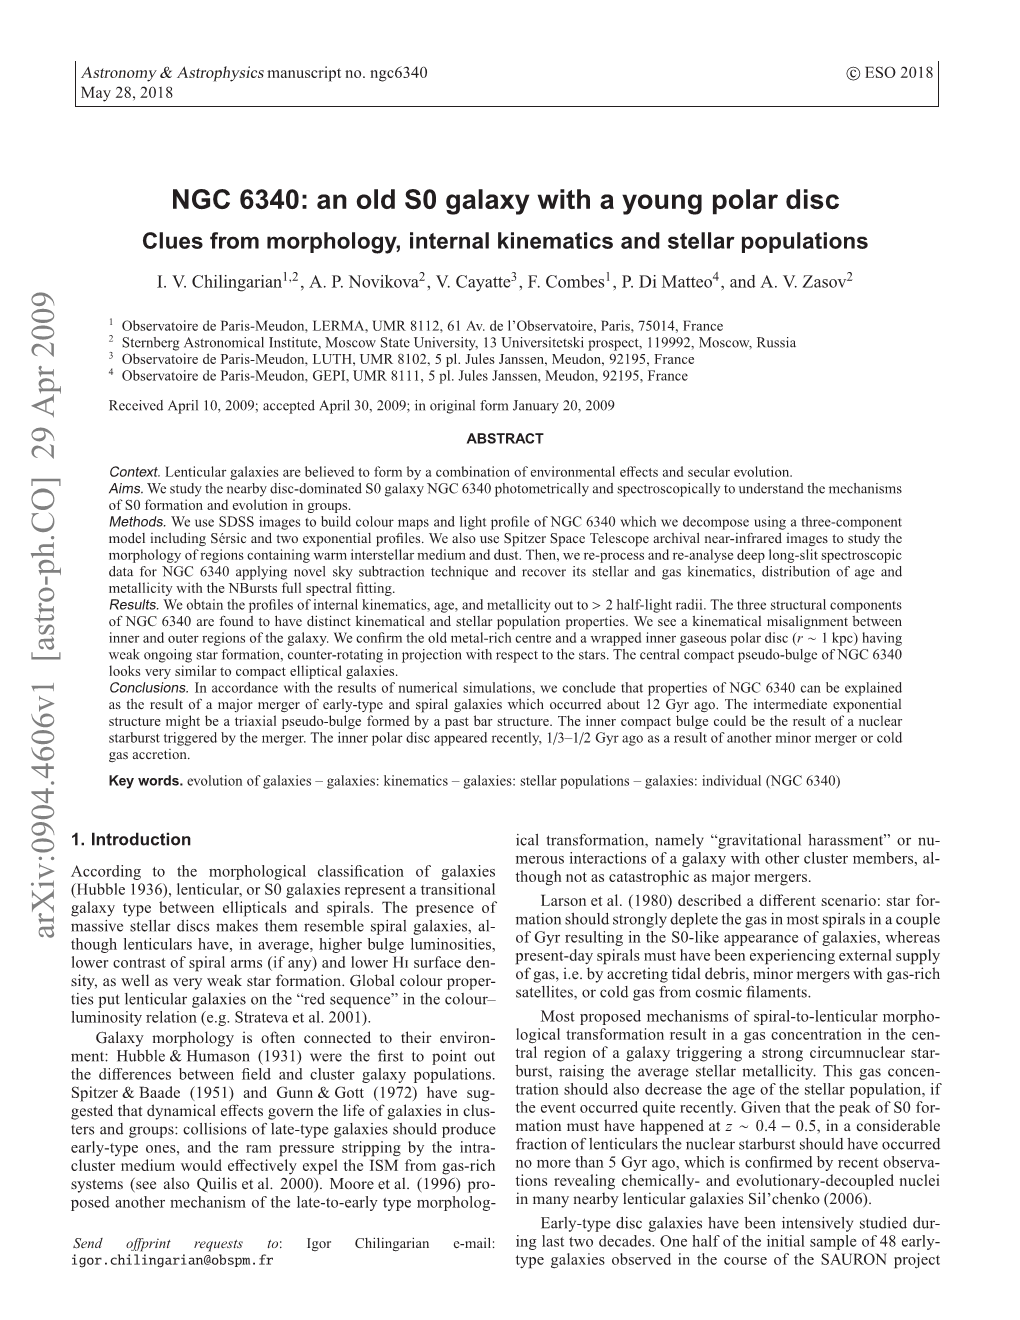 NGC 6340: an Old S0 Galaxy with a Young Polar Disc. Clues from Morphology, Internal Kinematics and Stellar Populations